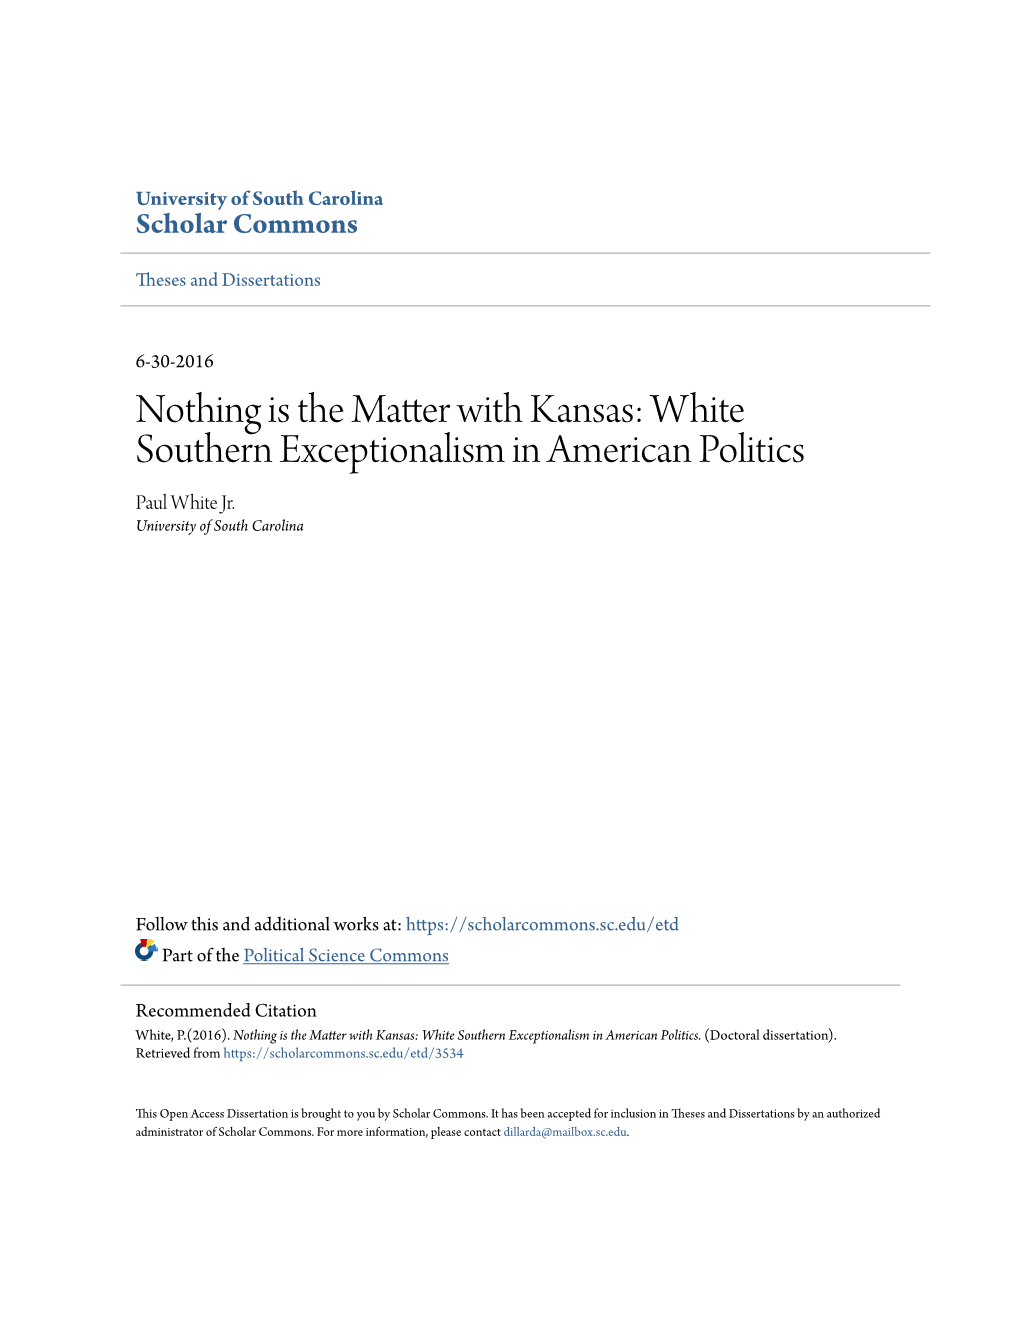 White Southern Exceptionalism in American Politics Paul White Jr